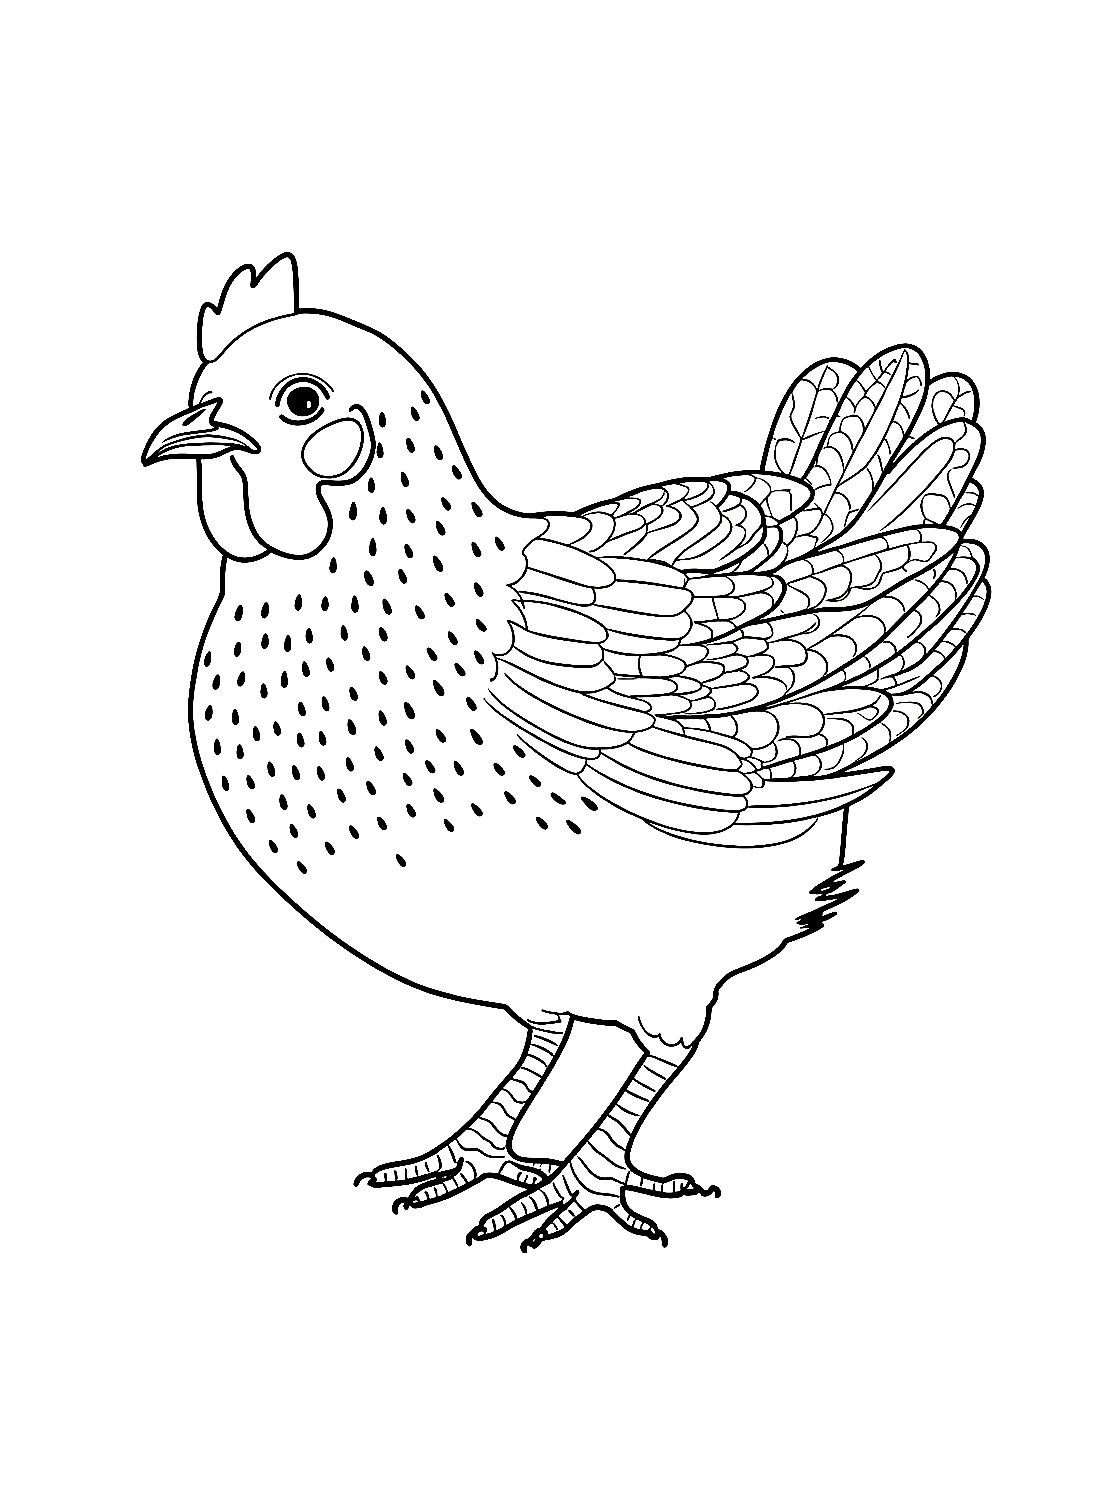 The Printable hen Coloring Page - Free Printable Coloring Pages